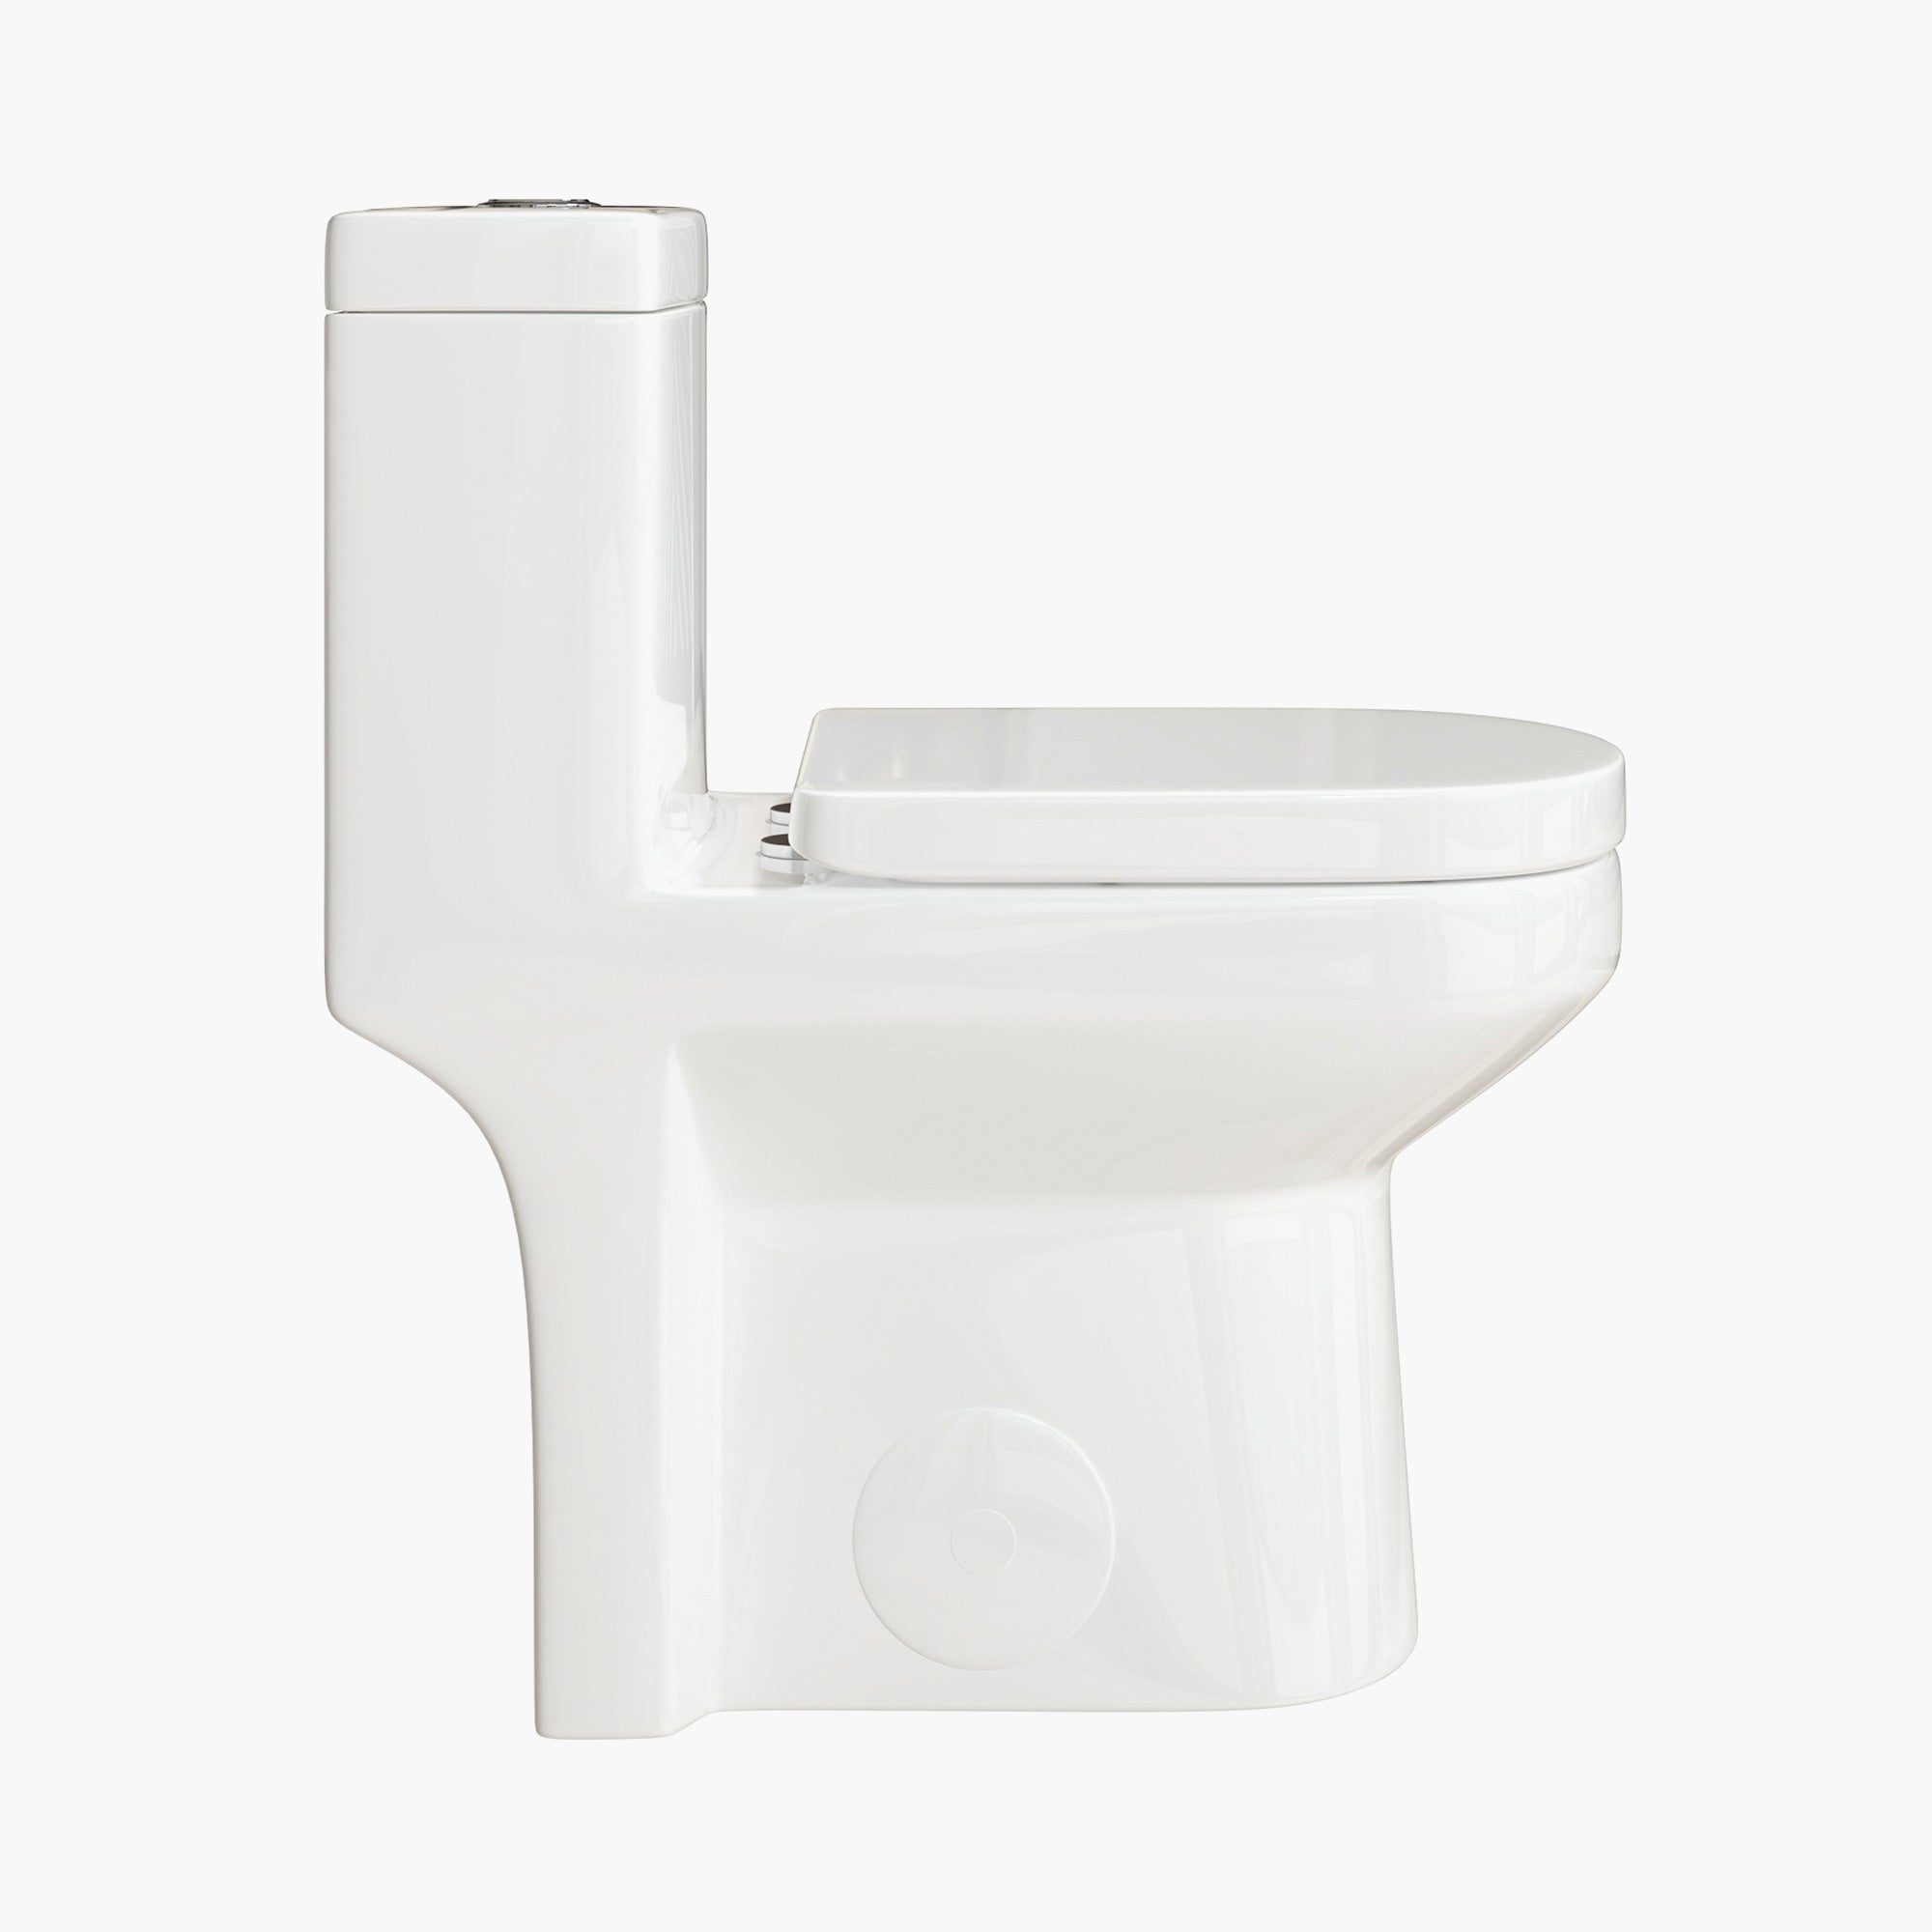 HOROW Small Toilet 1.28 GPF 10 Inch Rough In Toilet Model 8733-10